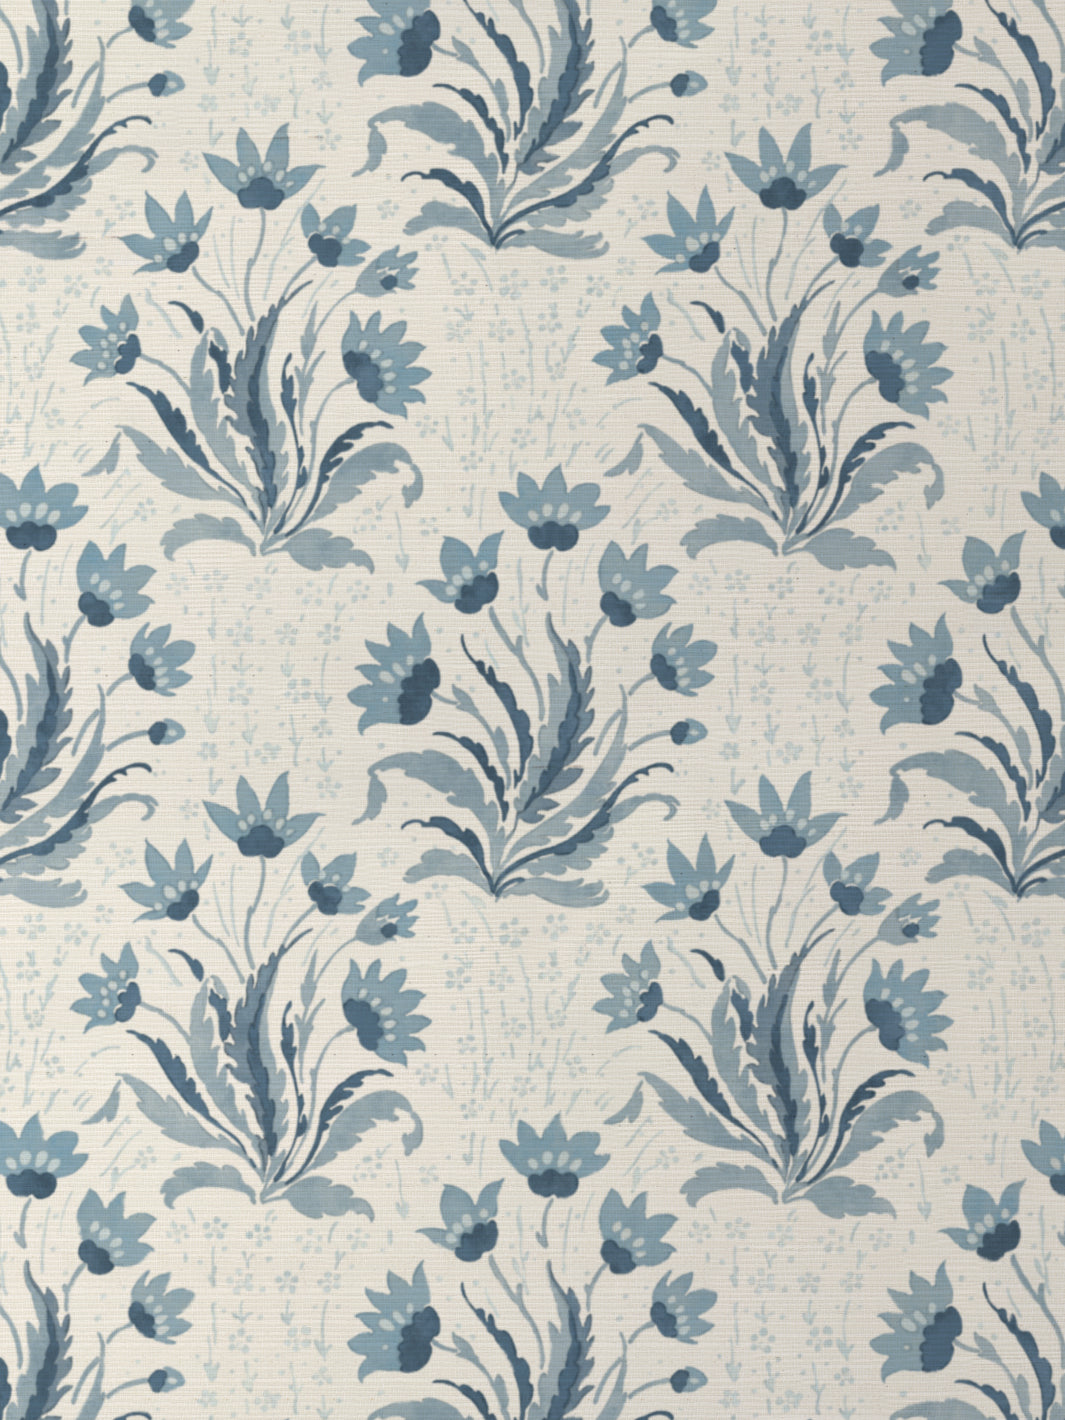 'Hillhouse Floral Tonal' Grasscloth Wallpaper by Nathan Turner - Blue